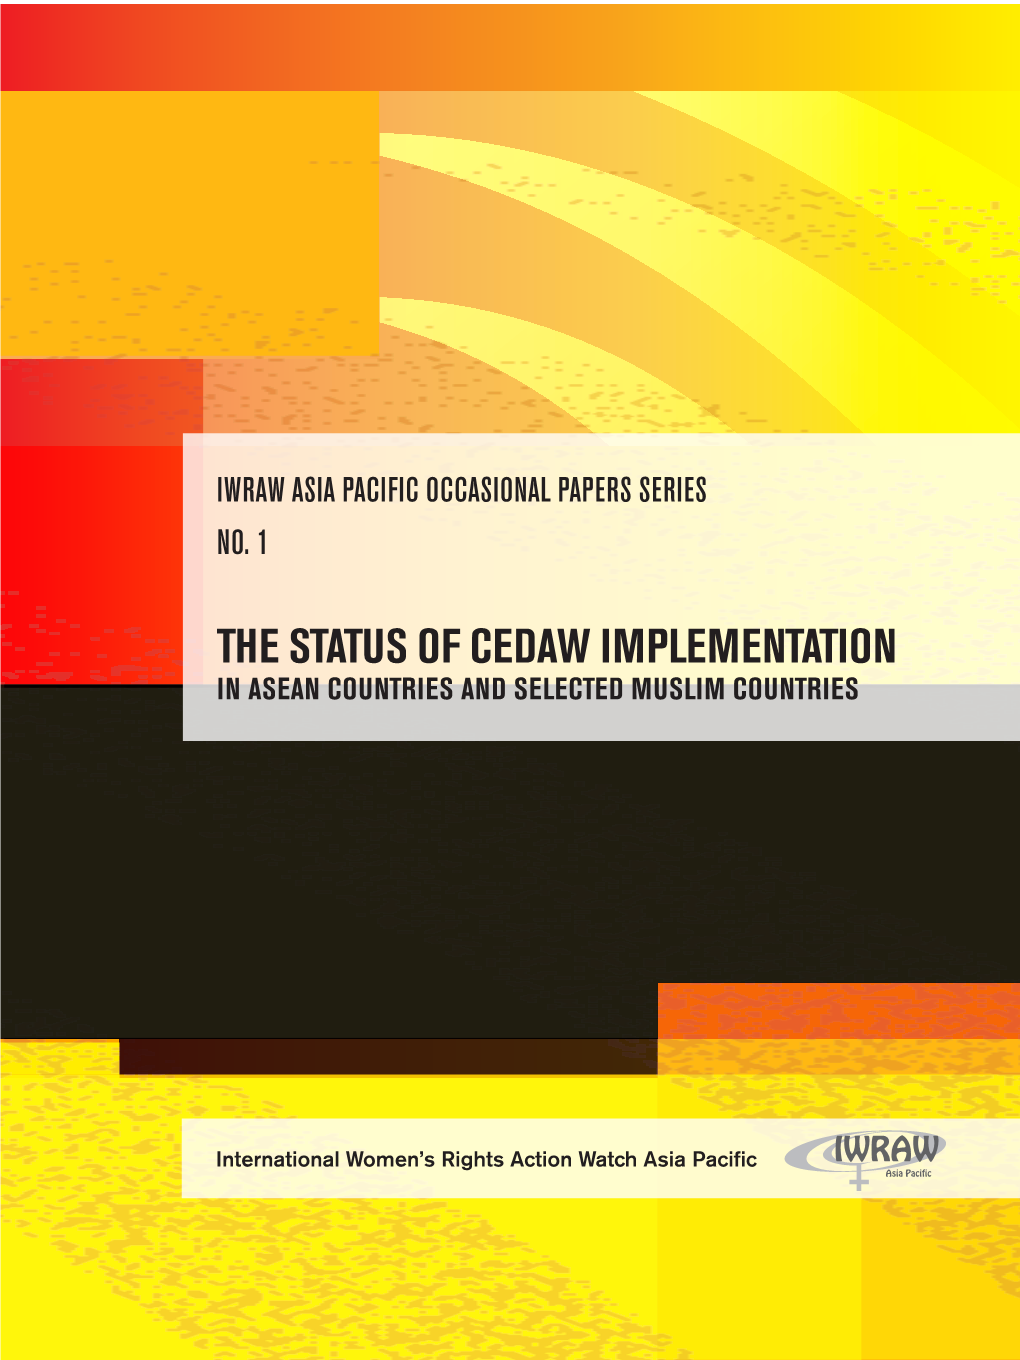 The Status of CEDAW Implementation in the ASEAN Countries and Selected Muslim Countries